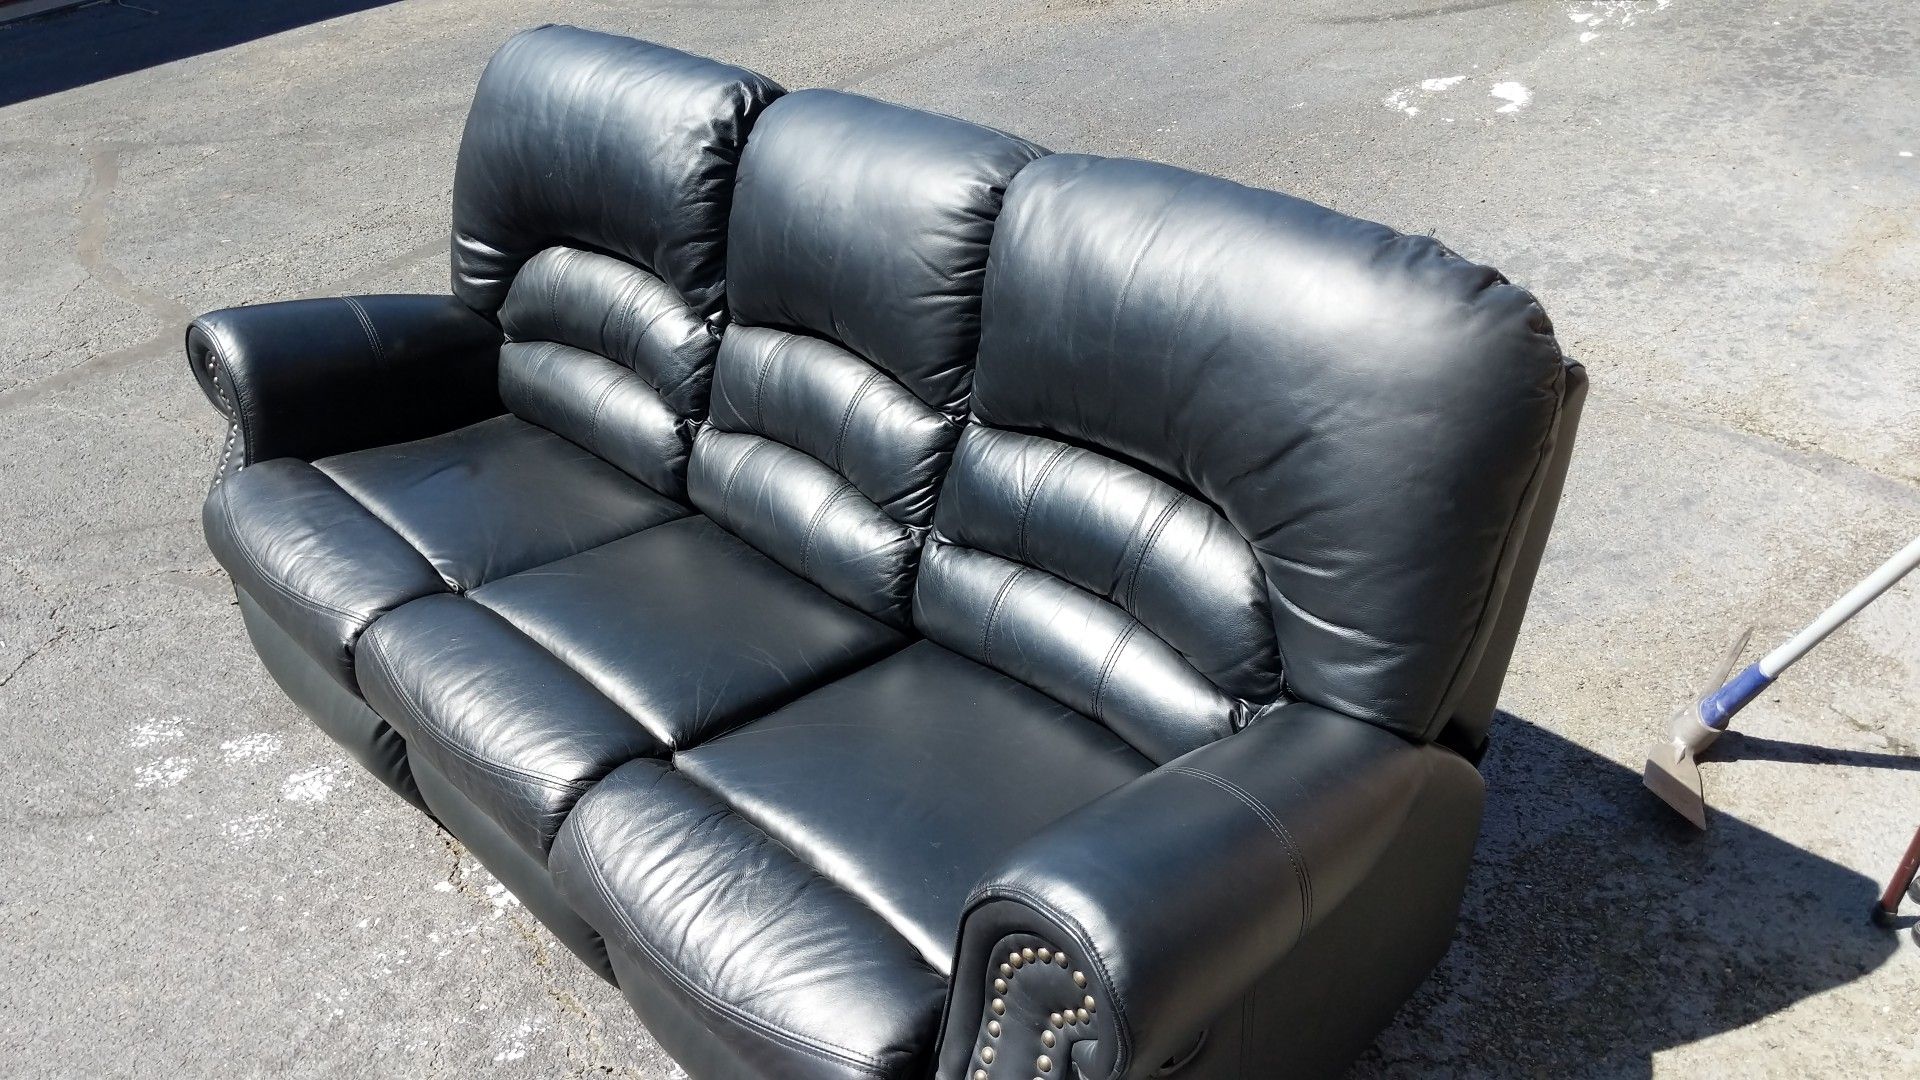 Leather Couch and Recliner